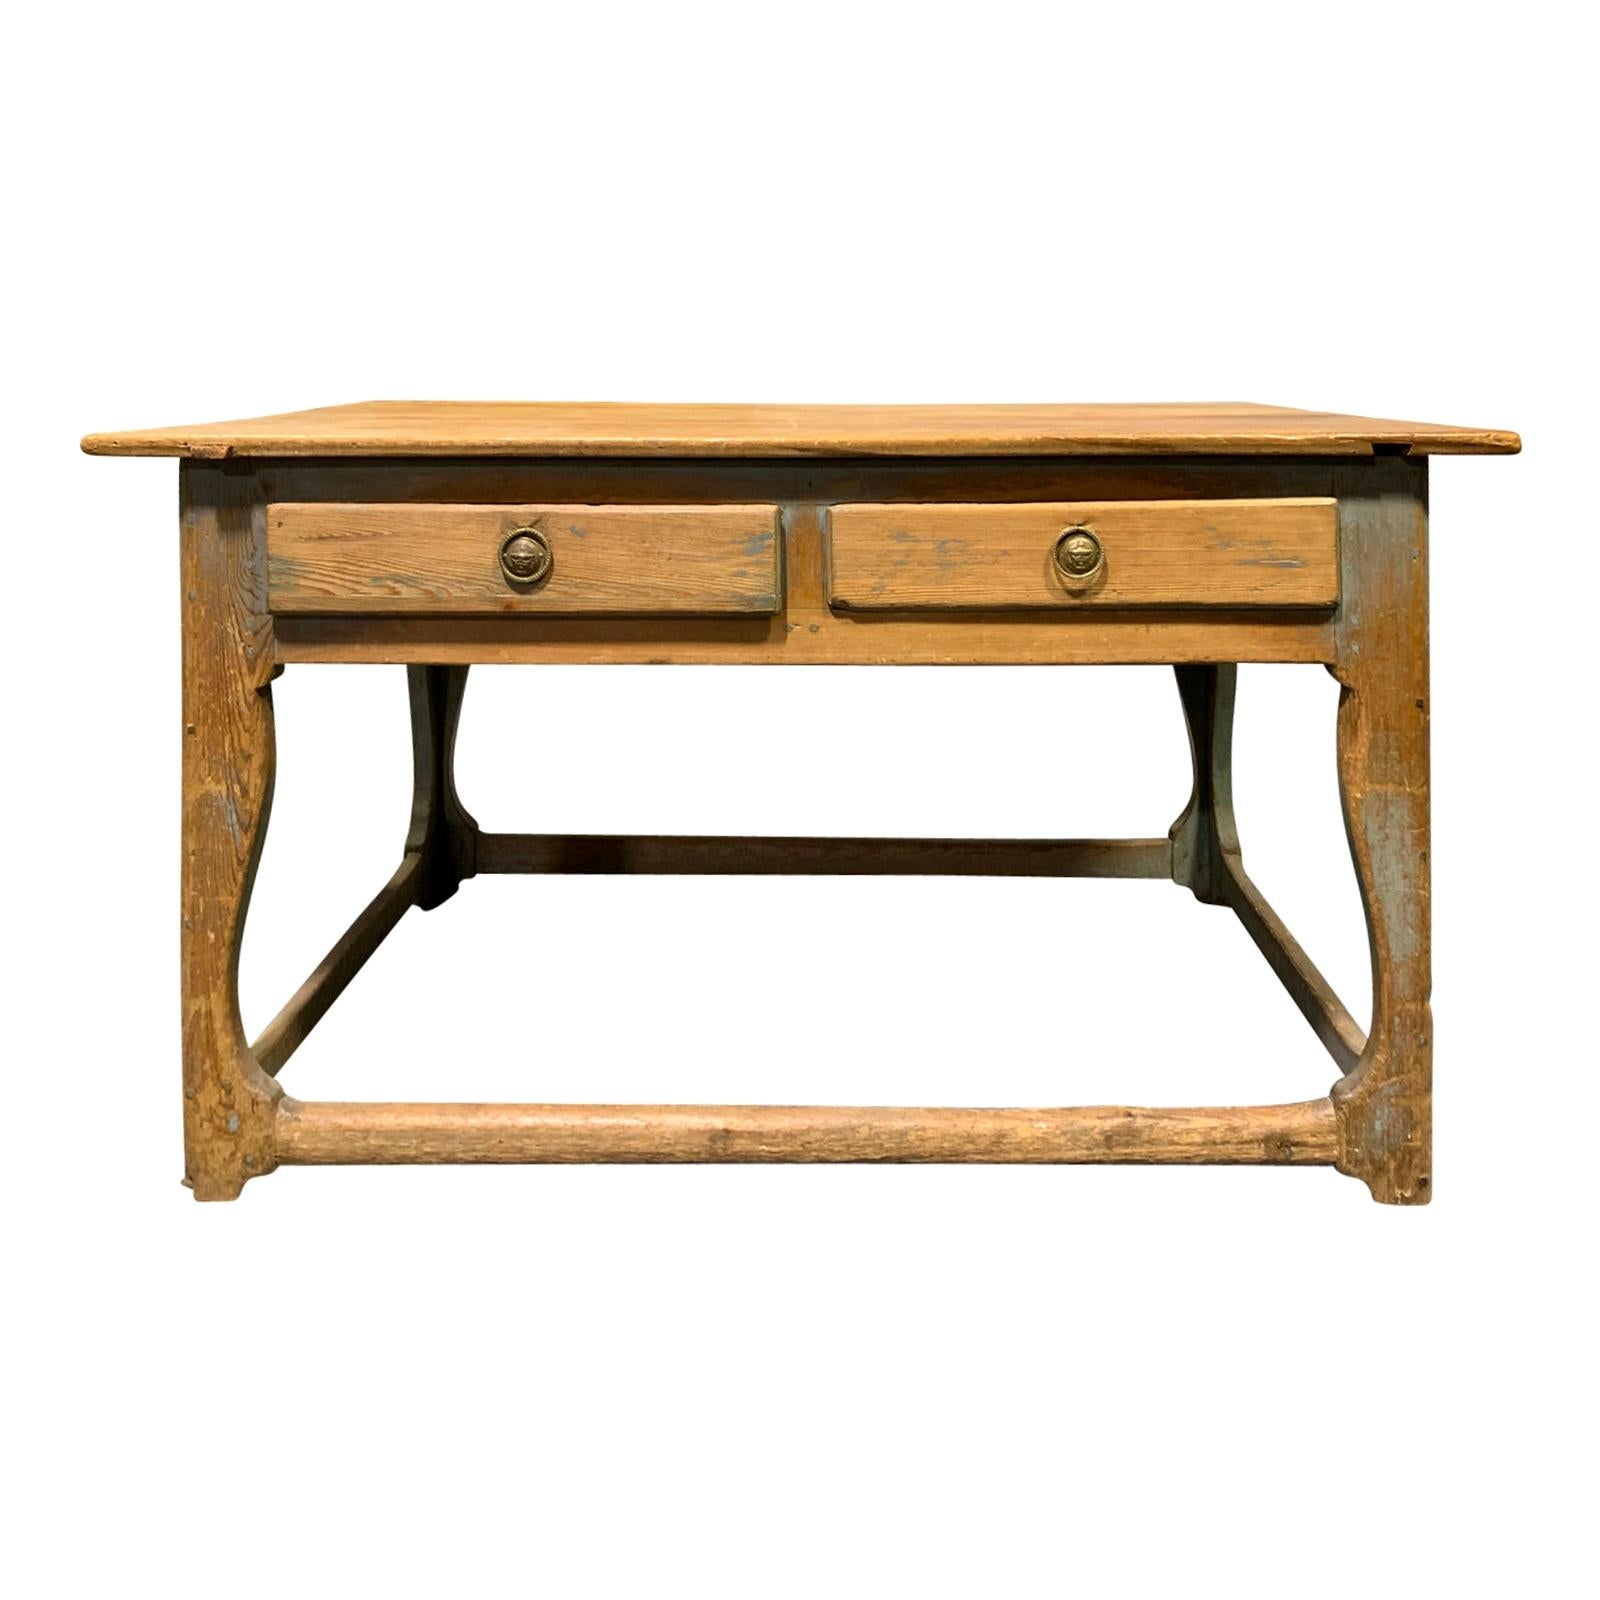 19th Century Swedish Scrubbed Pine Work Table with Old Blue Paint, Five Drawers For Sale